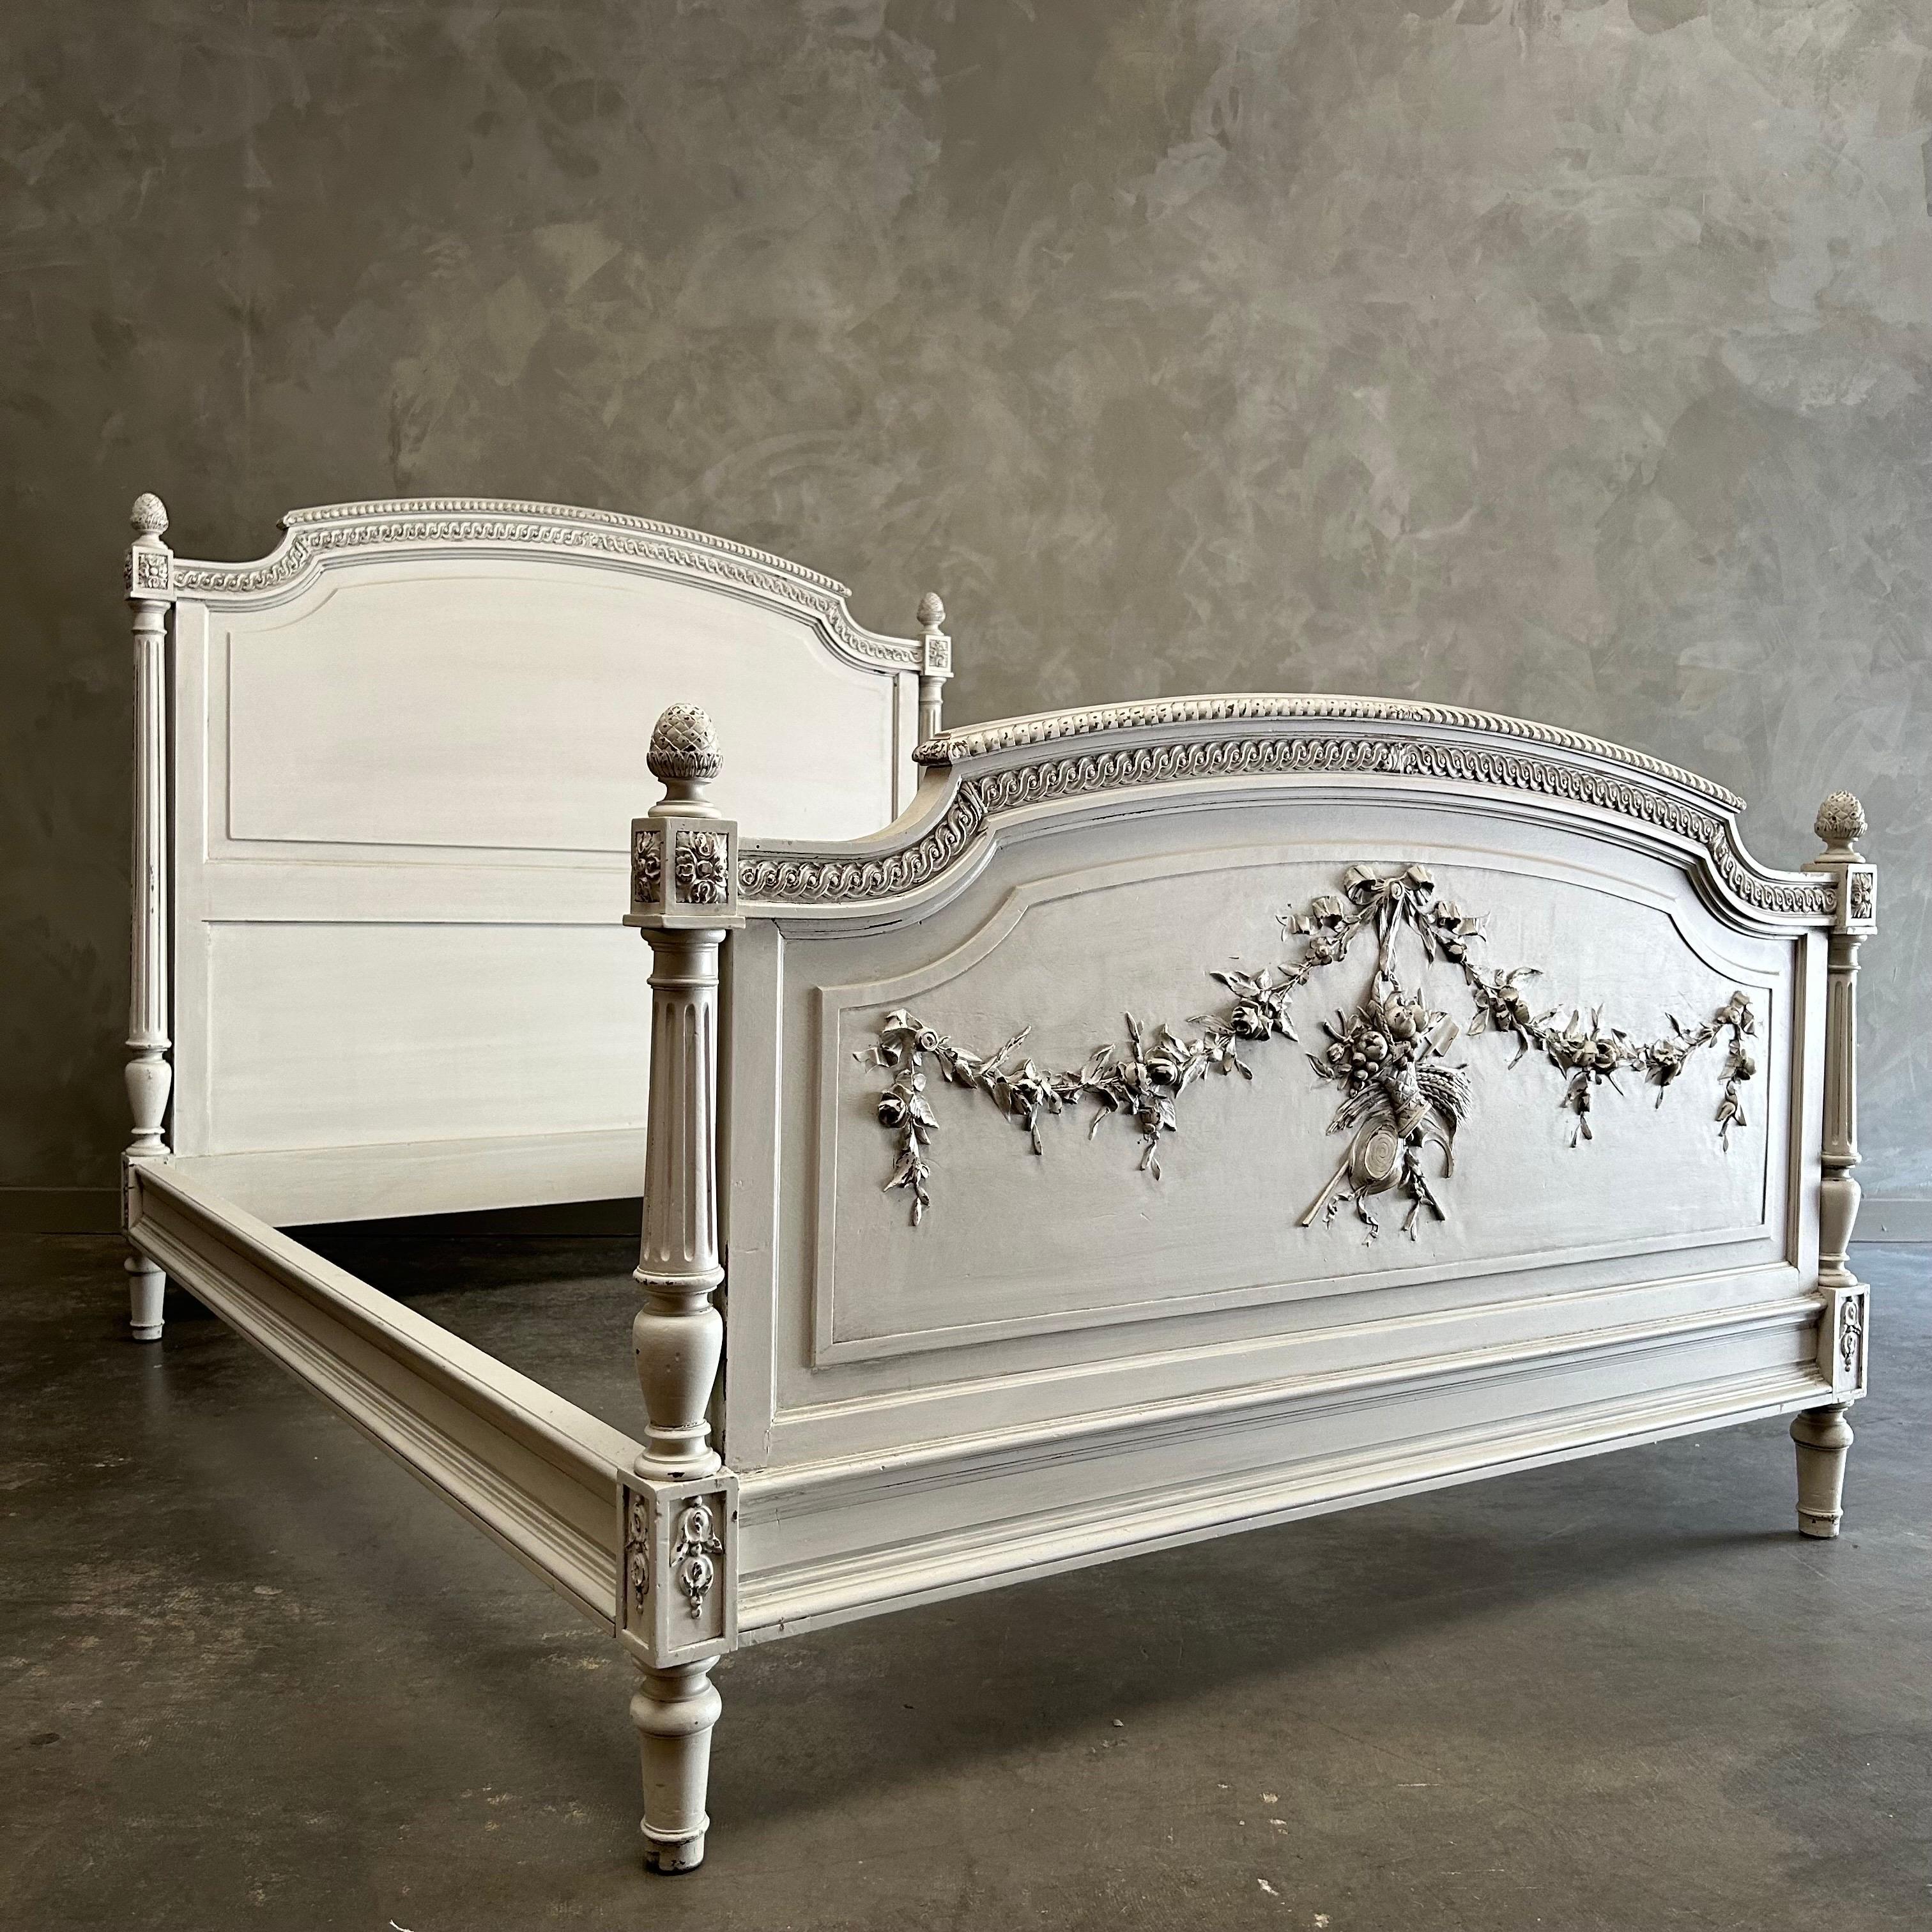 Louis XVI Style French Painted Bed
Beautiful carvings of rose swags and ribbons, with a basket of roses.
Total outter dimensions: 60”w x 79.5”d x 54.5”h
Footboard 36”h. 
Total Inside Dimensions for mattress :55.5”w x 75”d
Solid and sturdy ready for